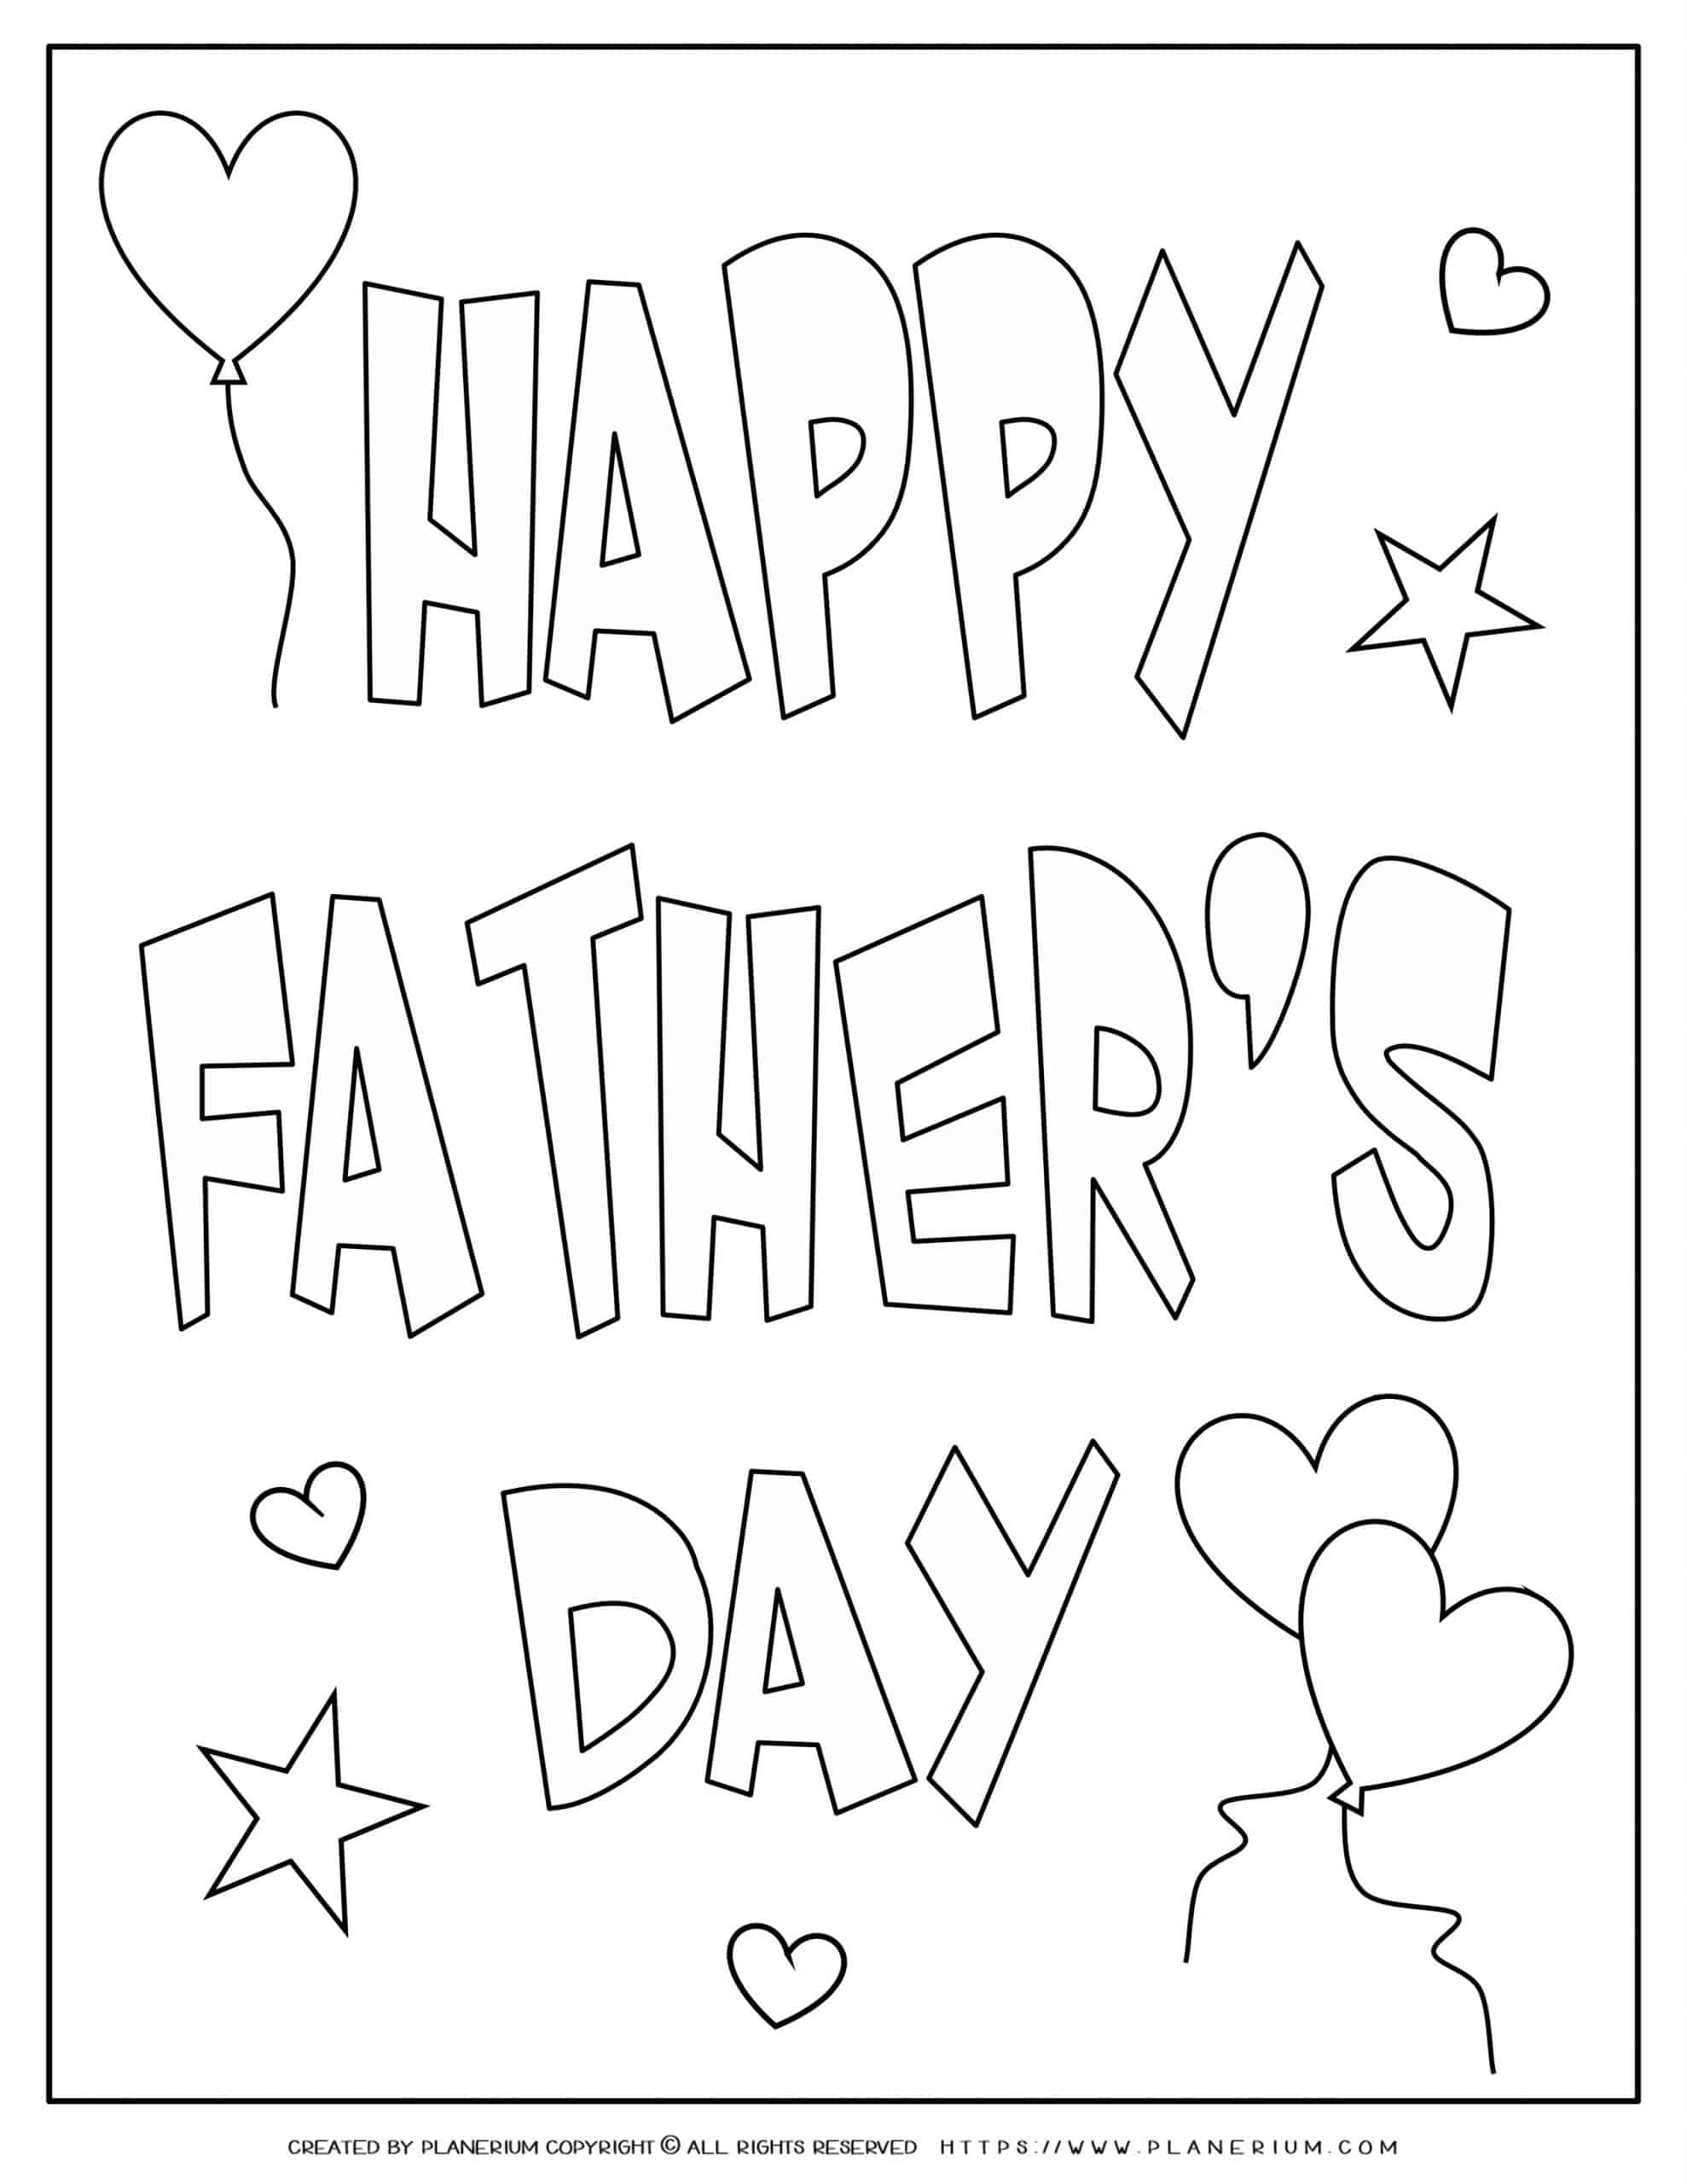 Father's Day - Coloring page - Happy Father's Day | Planerium